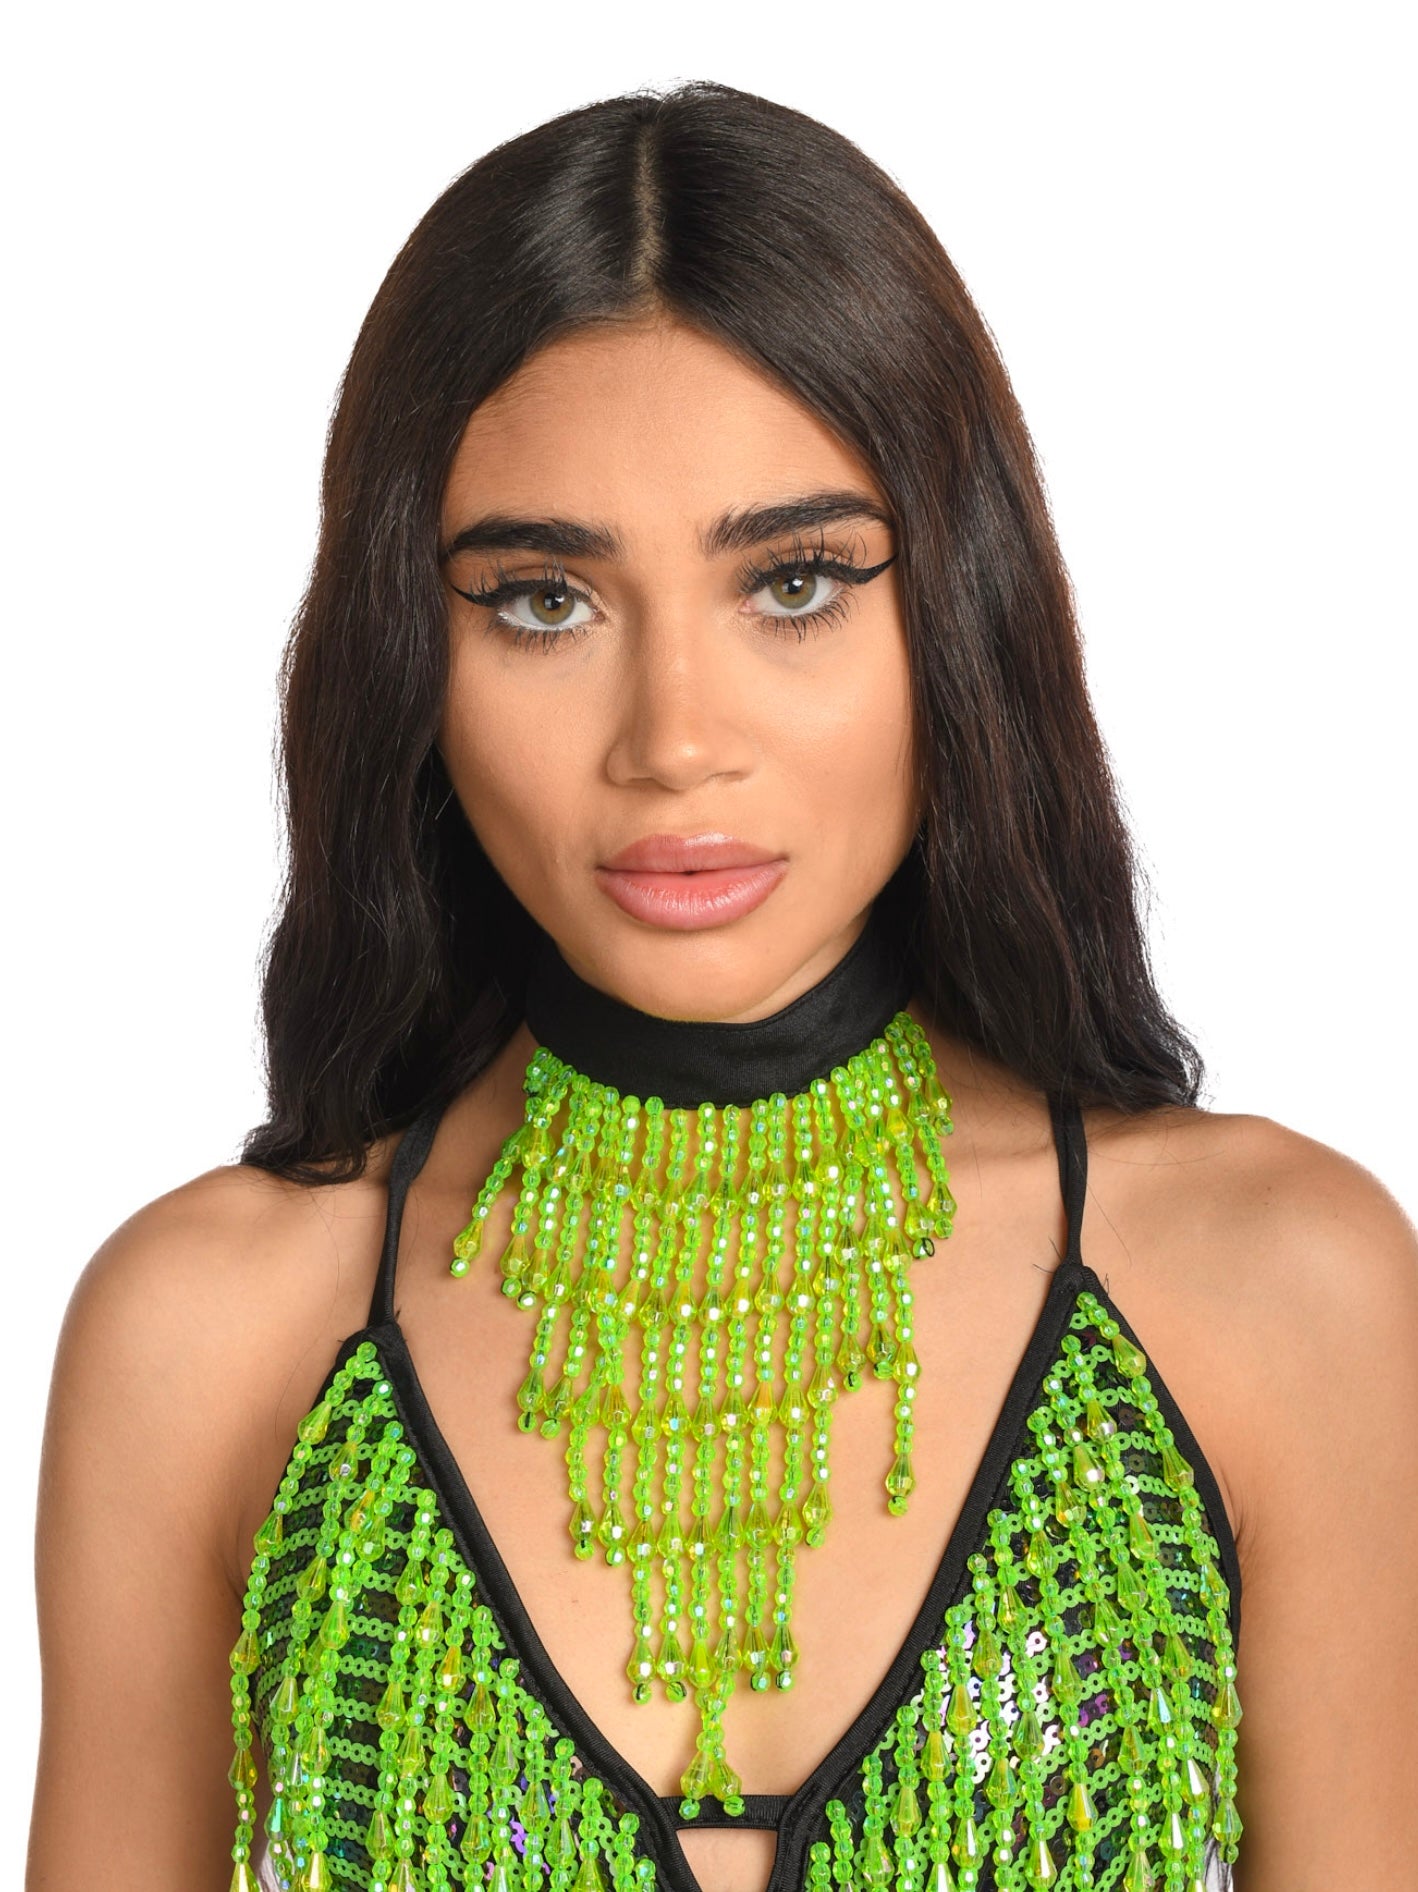 Hand Stitched Sequin Choker/Necklace - Neon Spiral